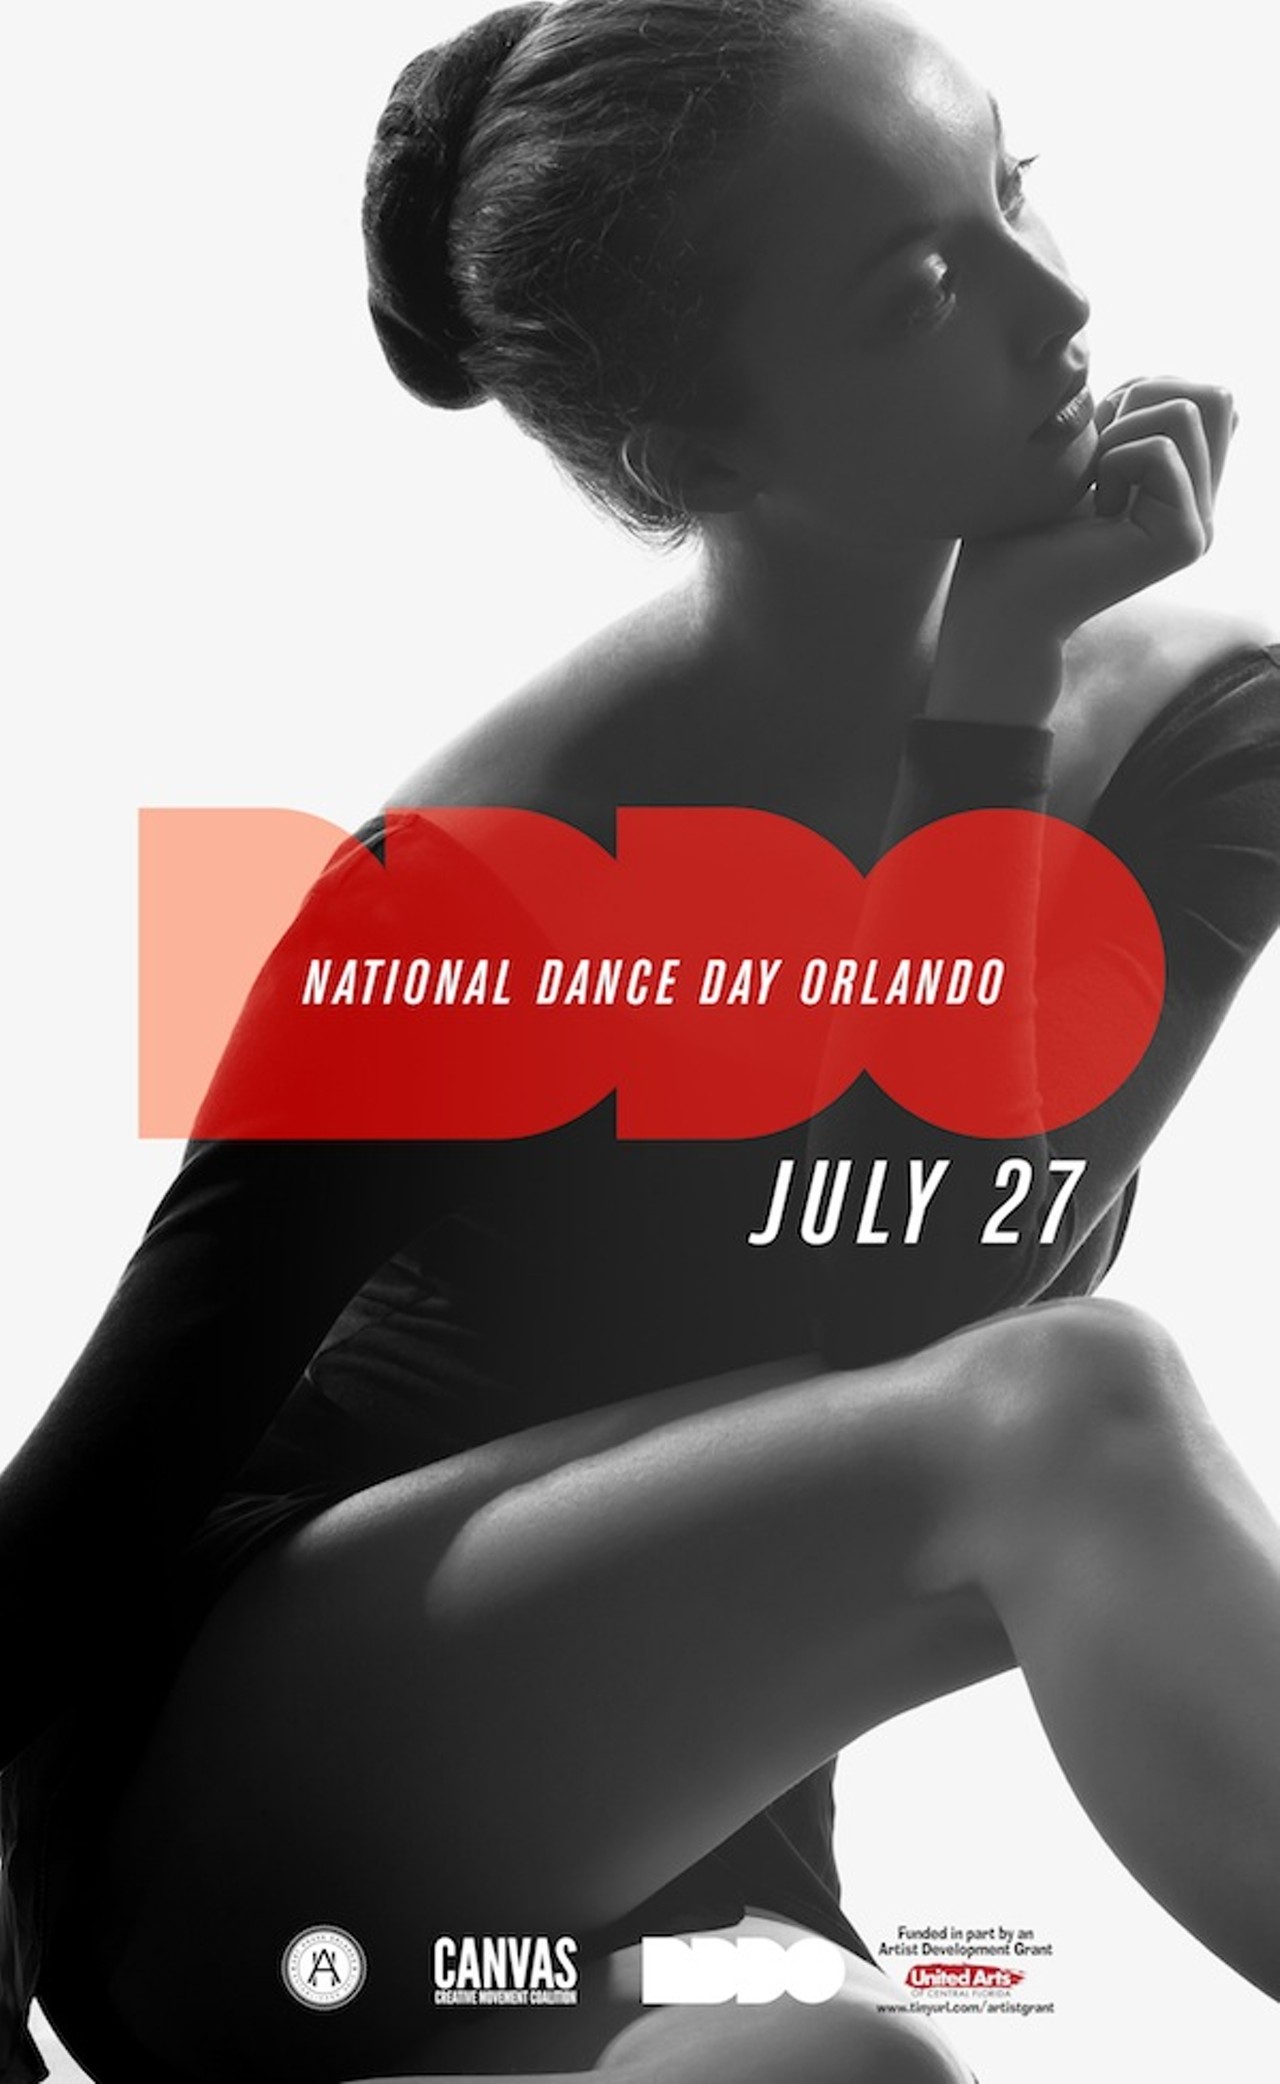 National Dance Day Orlando
Saturday, July 27
10 a.m.-10 p.m.
Art House Orlando, 111 N. Orange Ave.
nationaldancedayorlando.com
free-$10
If you&#146;ve ever been interested in learning more about Orlando&#146;s dance community, but you weren&#146;t sure where to start, here&#146;s your primer. National Dance Day &#150;&nbsp;a grass-roots initiative to inspire people to take an interest in dance (or, barring that, just move) &#150; is&nbsp;July 28, and our local dance companies plan to celebrate a day early. Beginning at&nbsp;9:30 a.m., local instructors and performers will hold open dance workshops and classes that anyone is welcome to participate in if they sign up. Got two left feet? No worries: There will be open workshops led by longtime dancers in which you can learn about improv, African jazz, hip-hop dance, barre and stretch, and contemporary. Got two left feet and a serious case of performance anxiety? OK, then you can just watch: At&nbsp;7:30 p.m. some of the best dance troupes in the region, including Me Dance, DRIP, Voci Dance, Orlando Ballet School and more, will hold live performances, and there will be art installations, sculptures and experiences throughout the evening that highlight the dance community. Look, ma &#150;&nbsp;we&#146;re dancing!&nbsp;&#150;&nbsp;Erin Sullivan